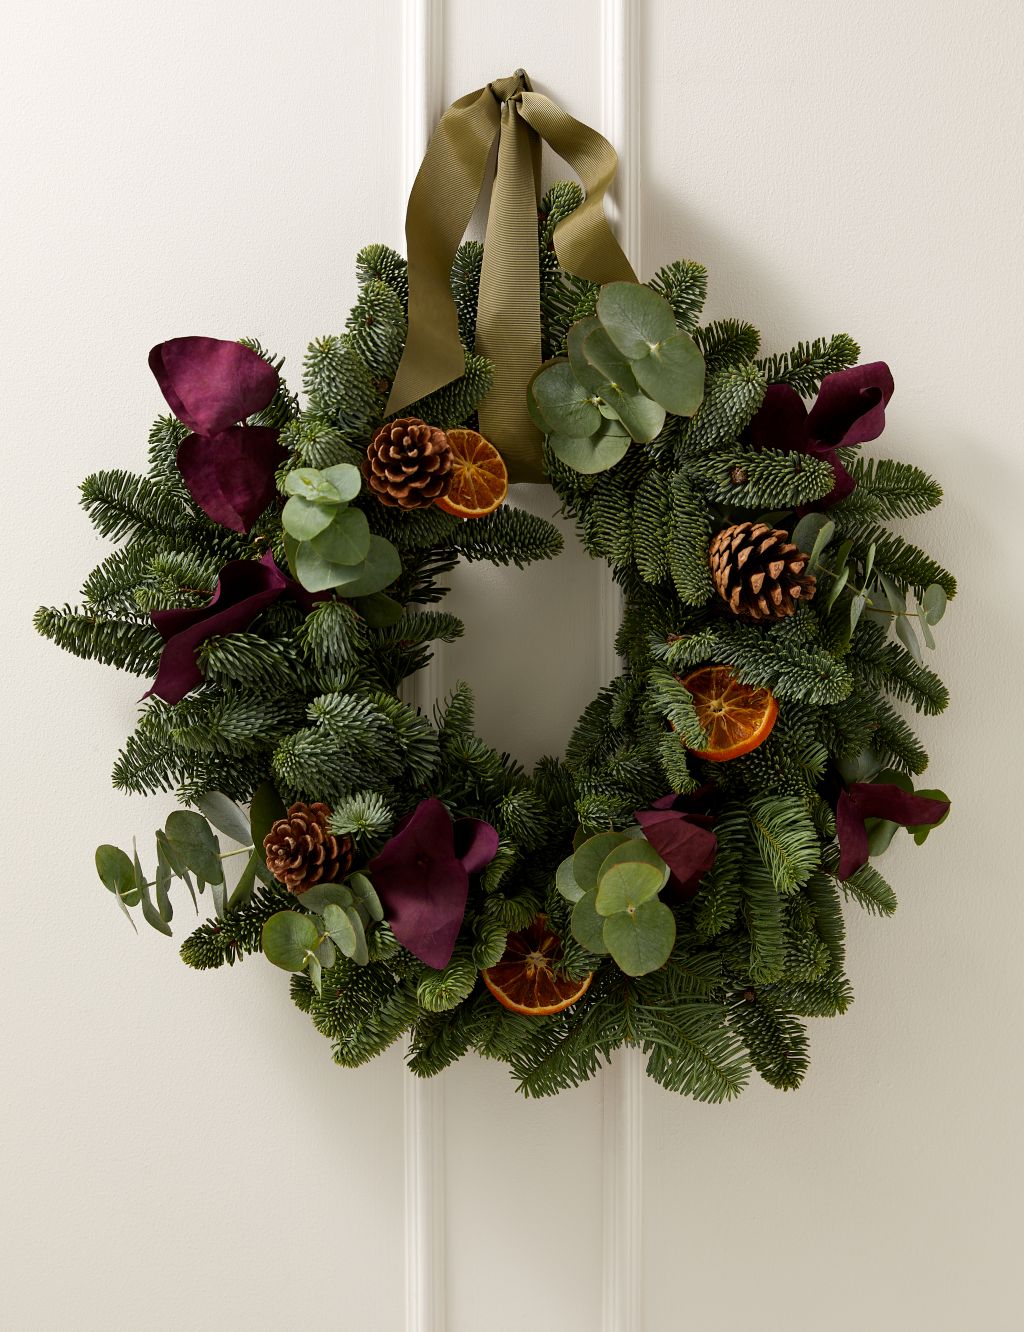 Create Your Own Festive Red Wreath